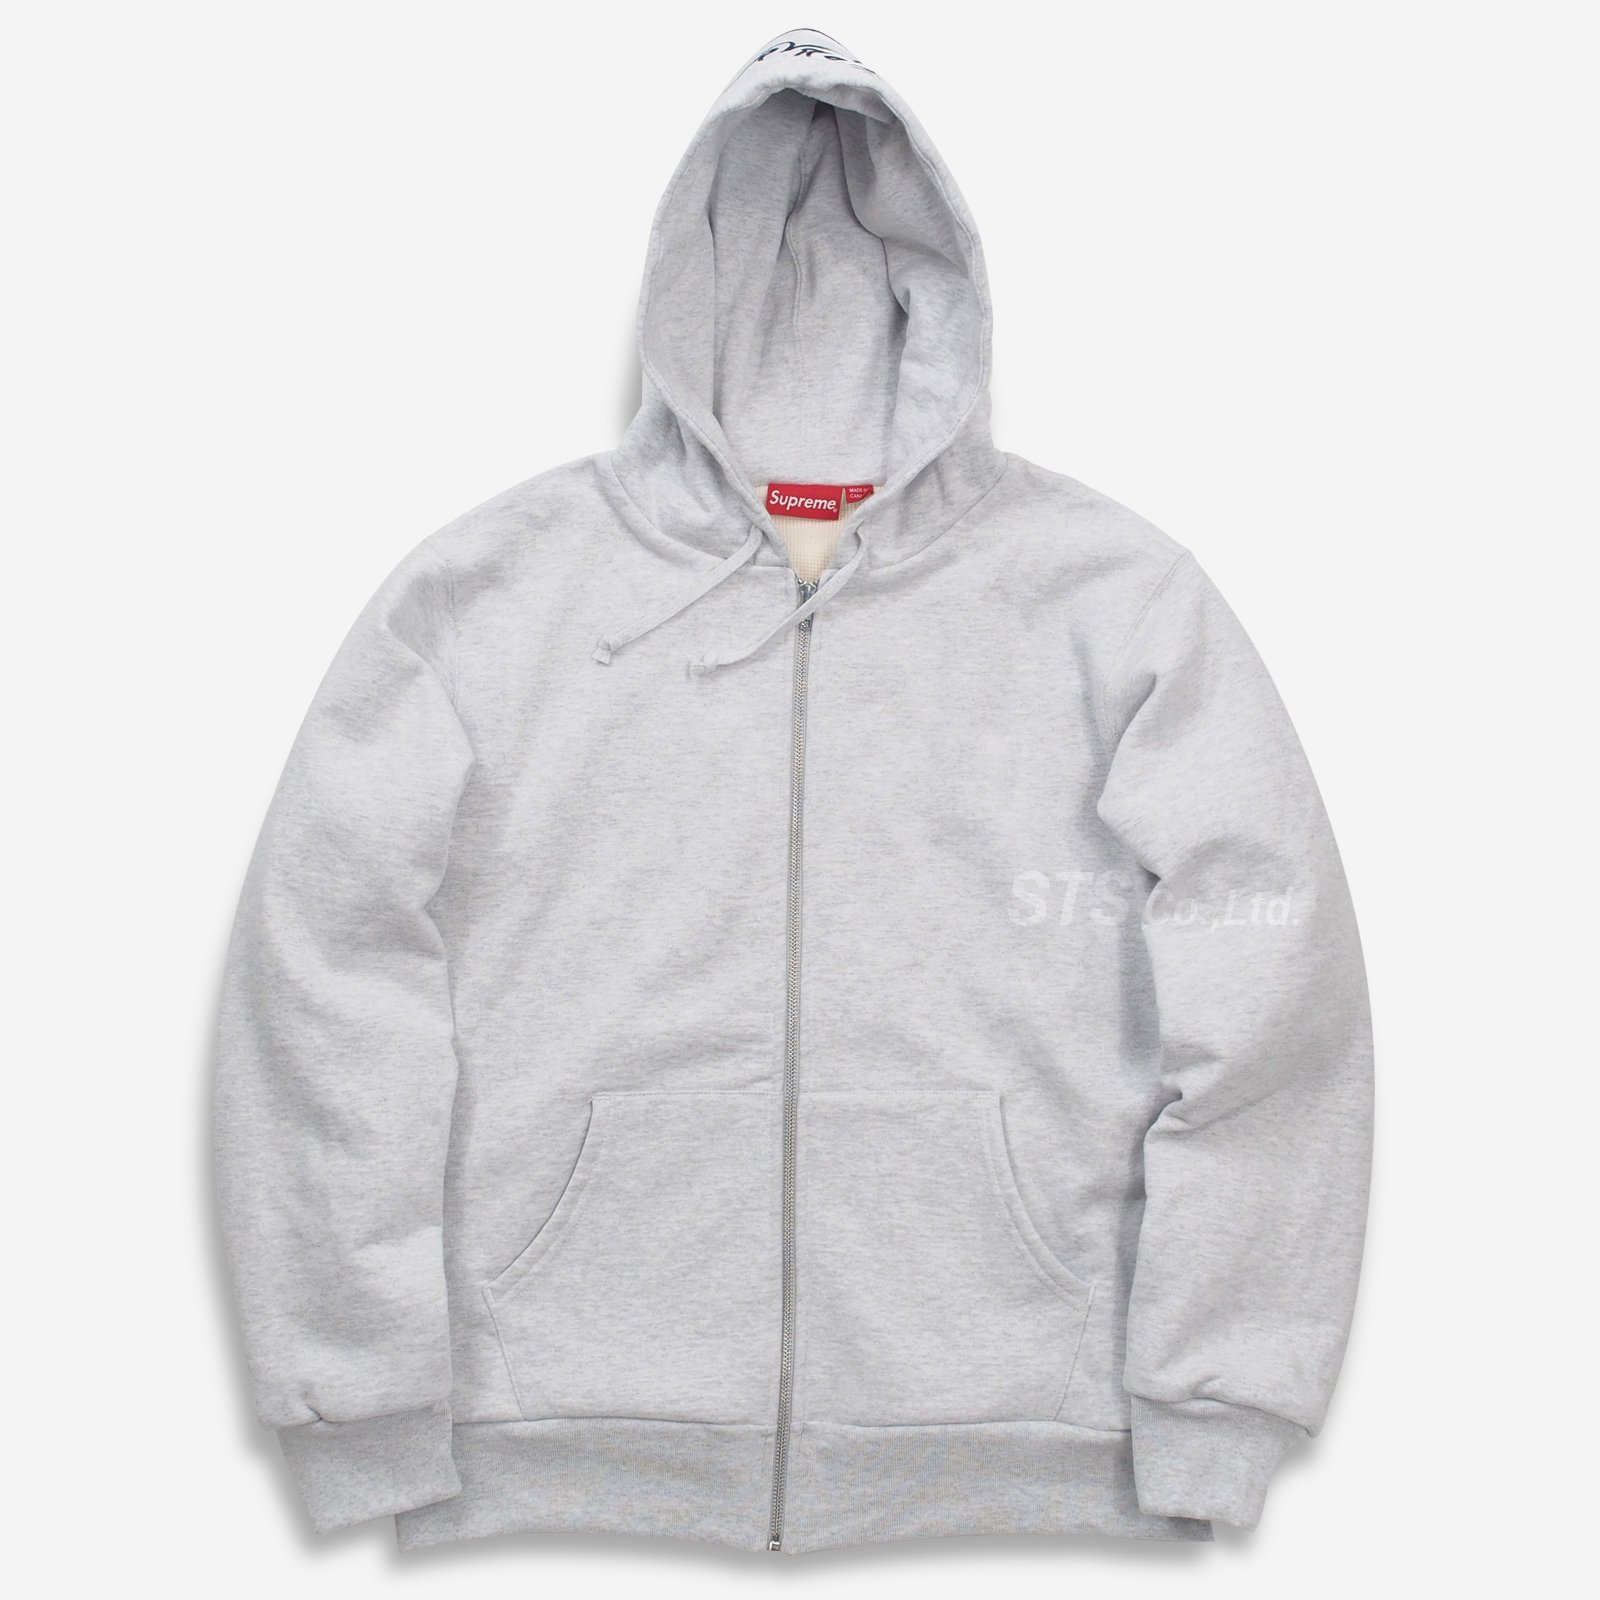 Zip Up Supreme Hoodie Online Hotsell, UP TO 61% OFF | www 